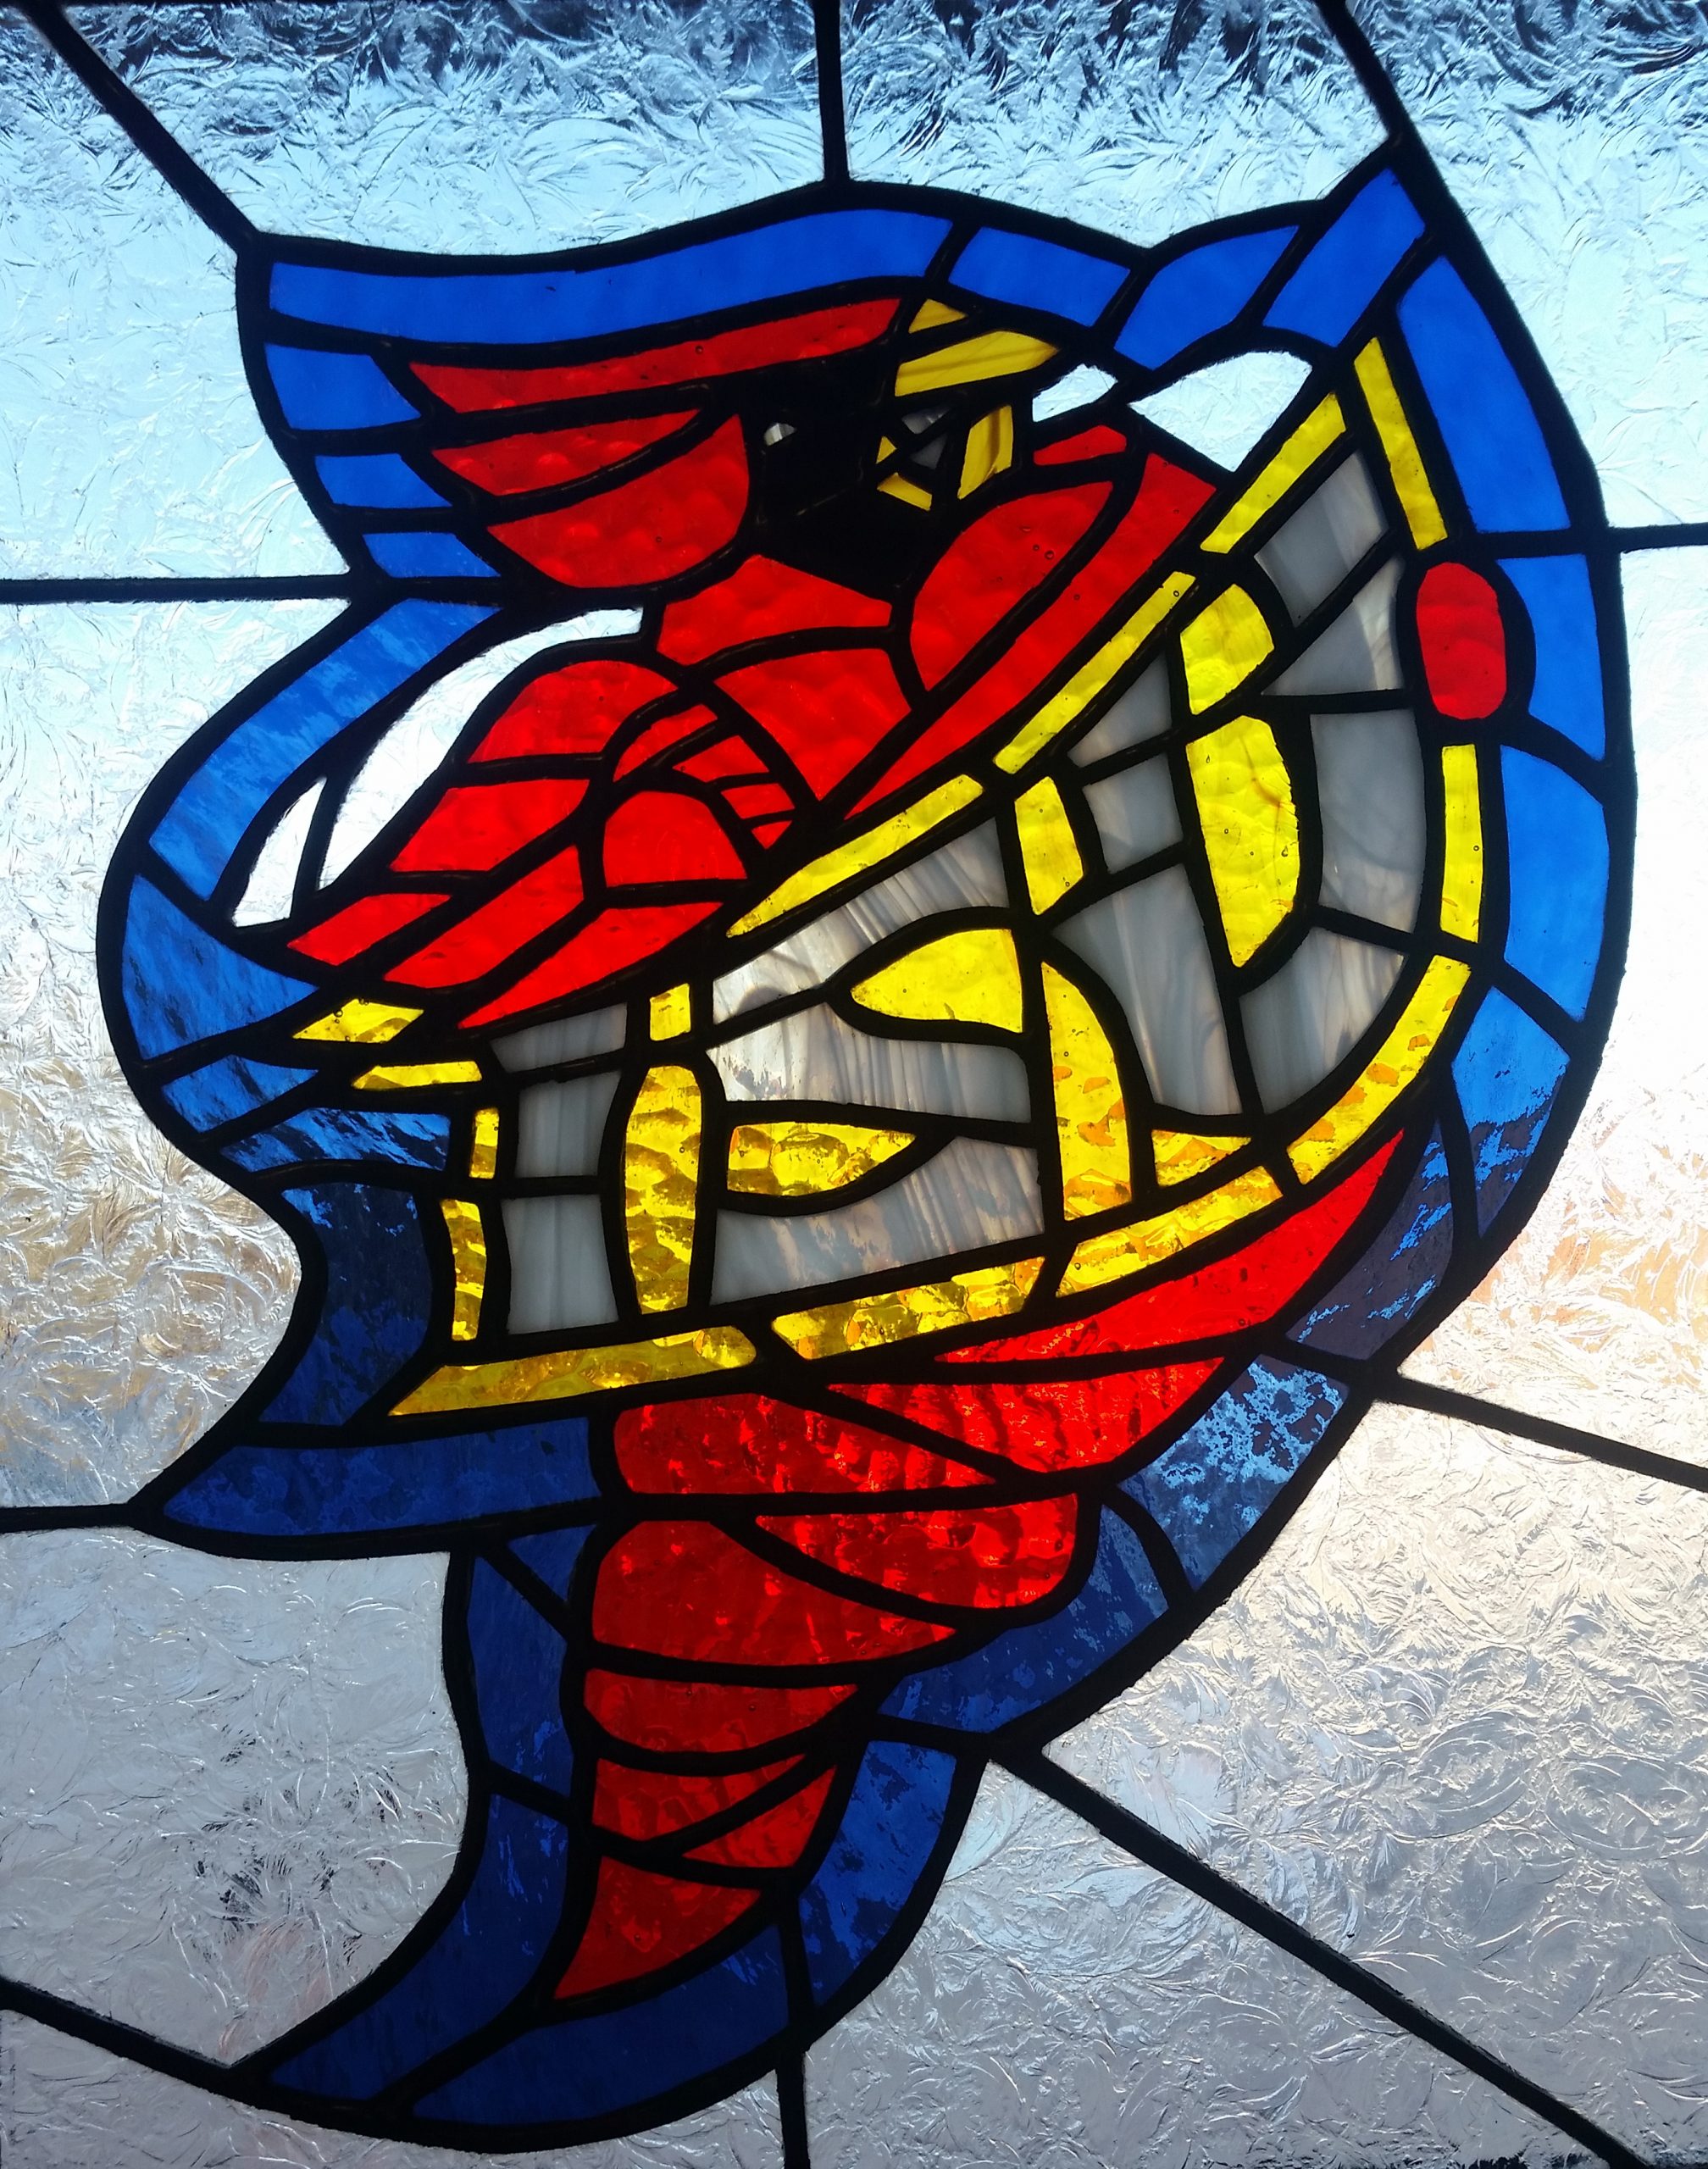 A stained glass of the old ISU logo, of the Cyclone mason and the text "ISU"